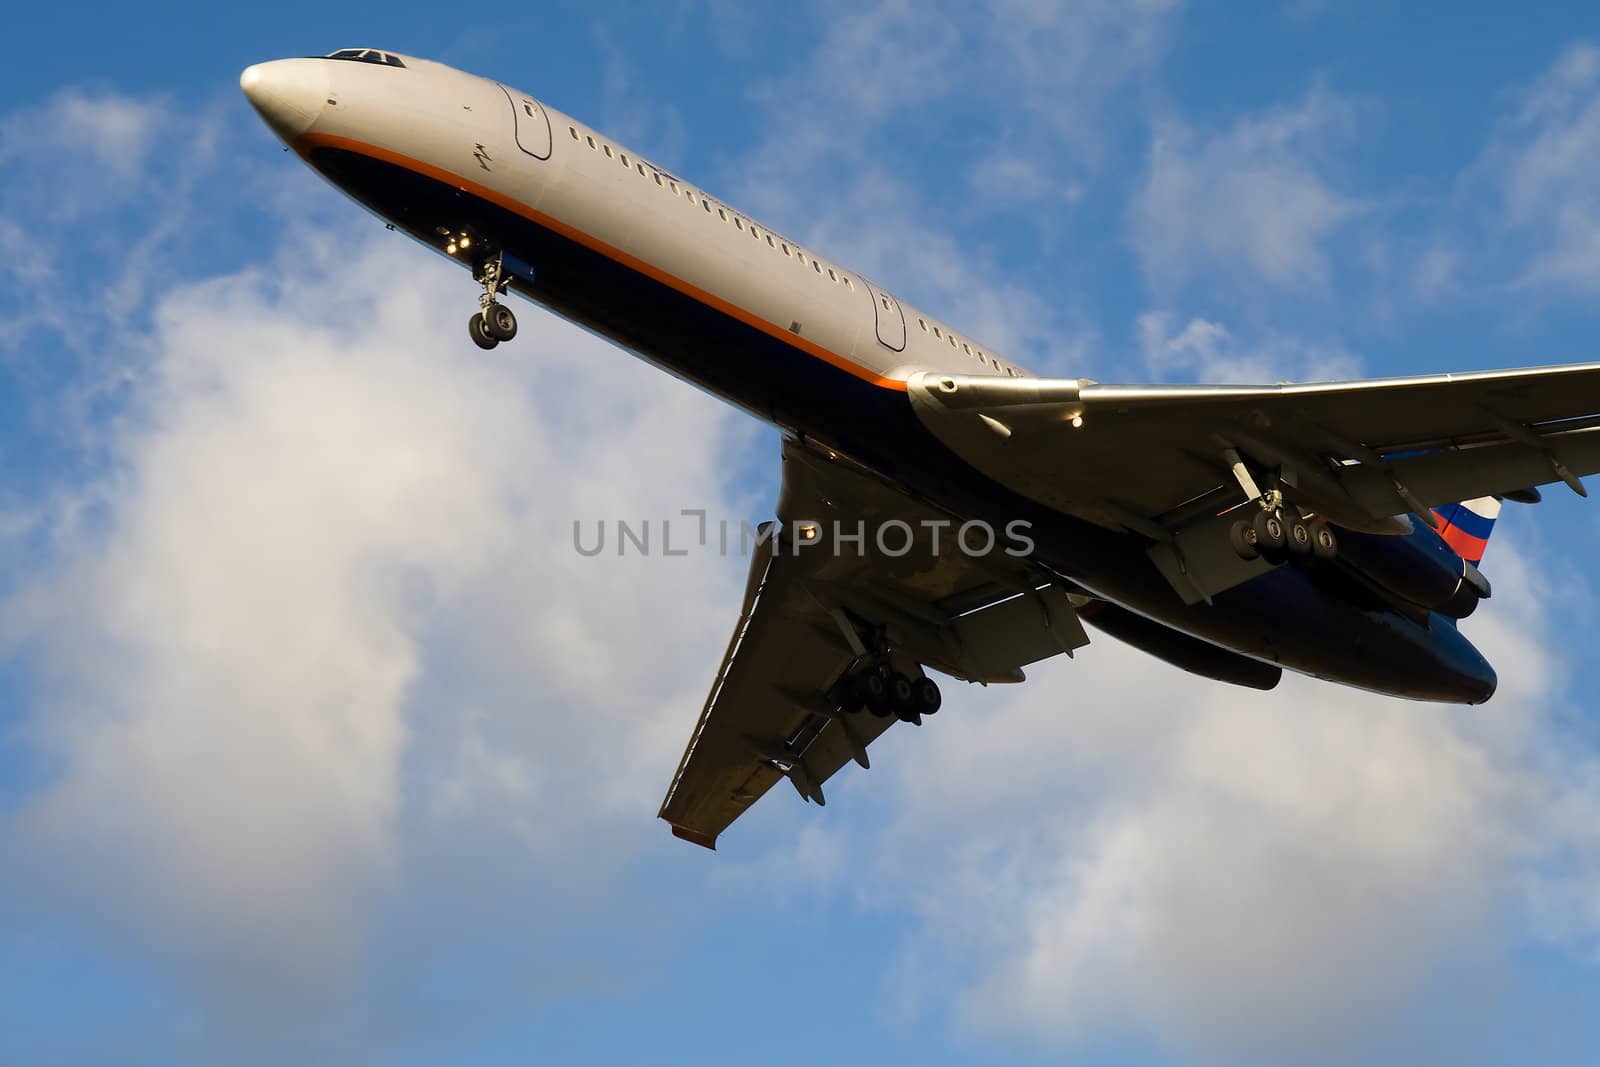 Passenger airplane taking off in blue sky with clouds by serpl